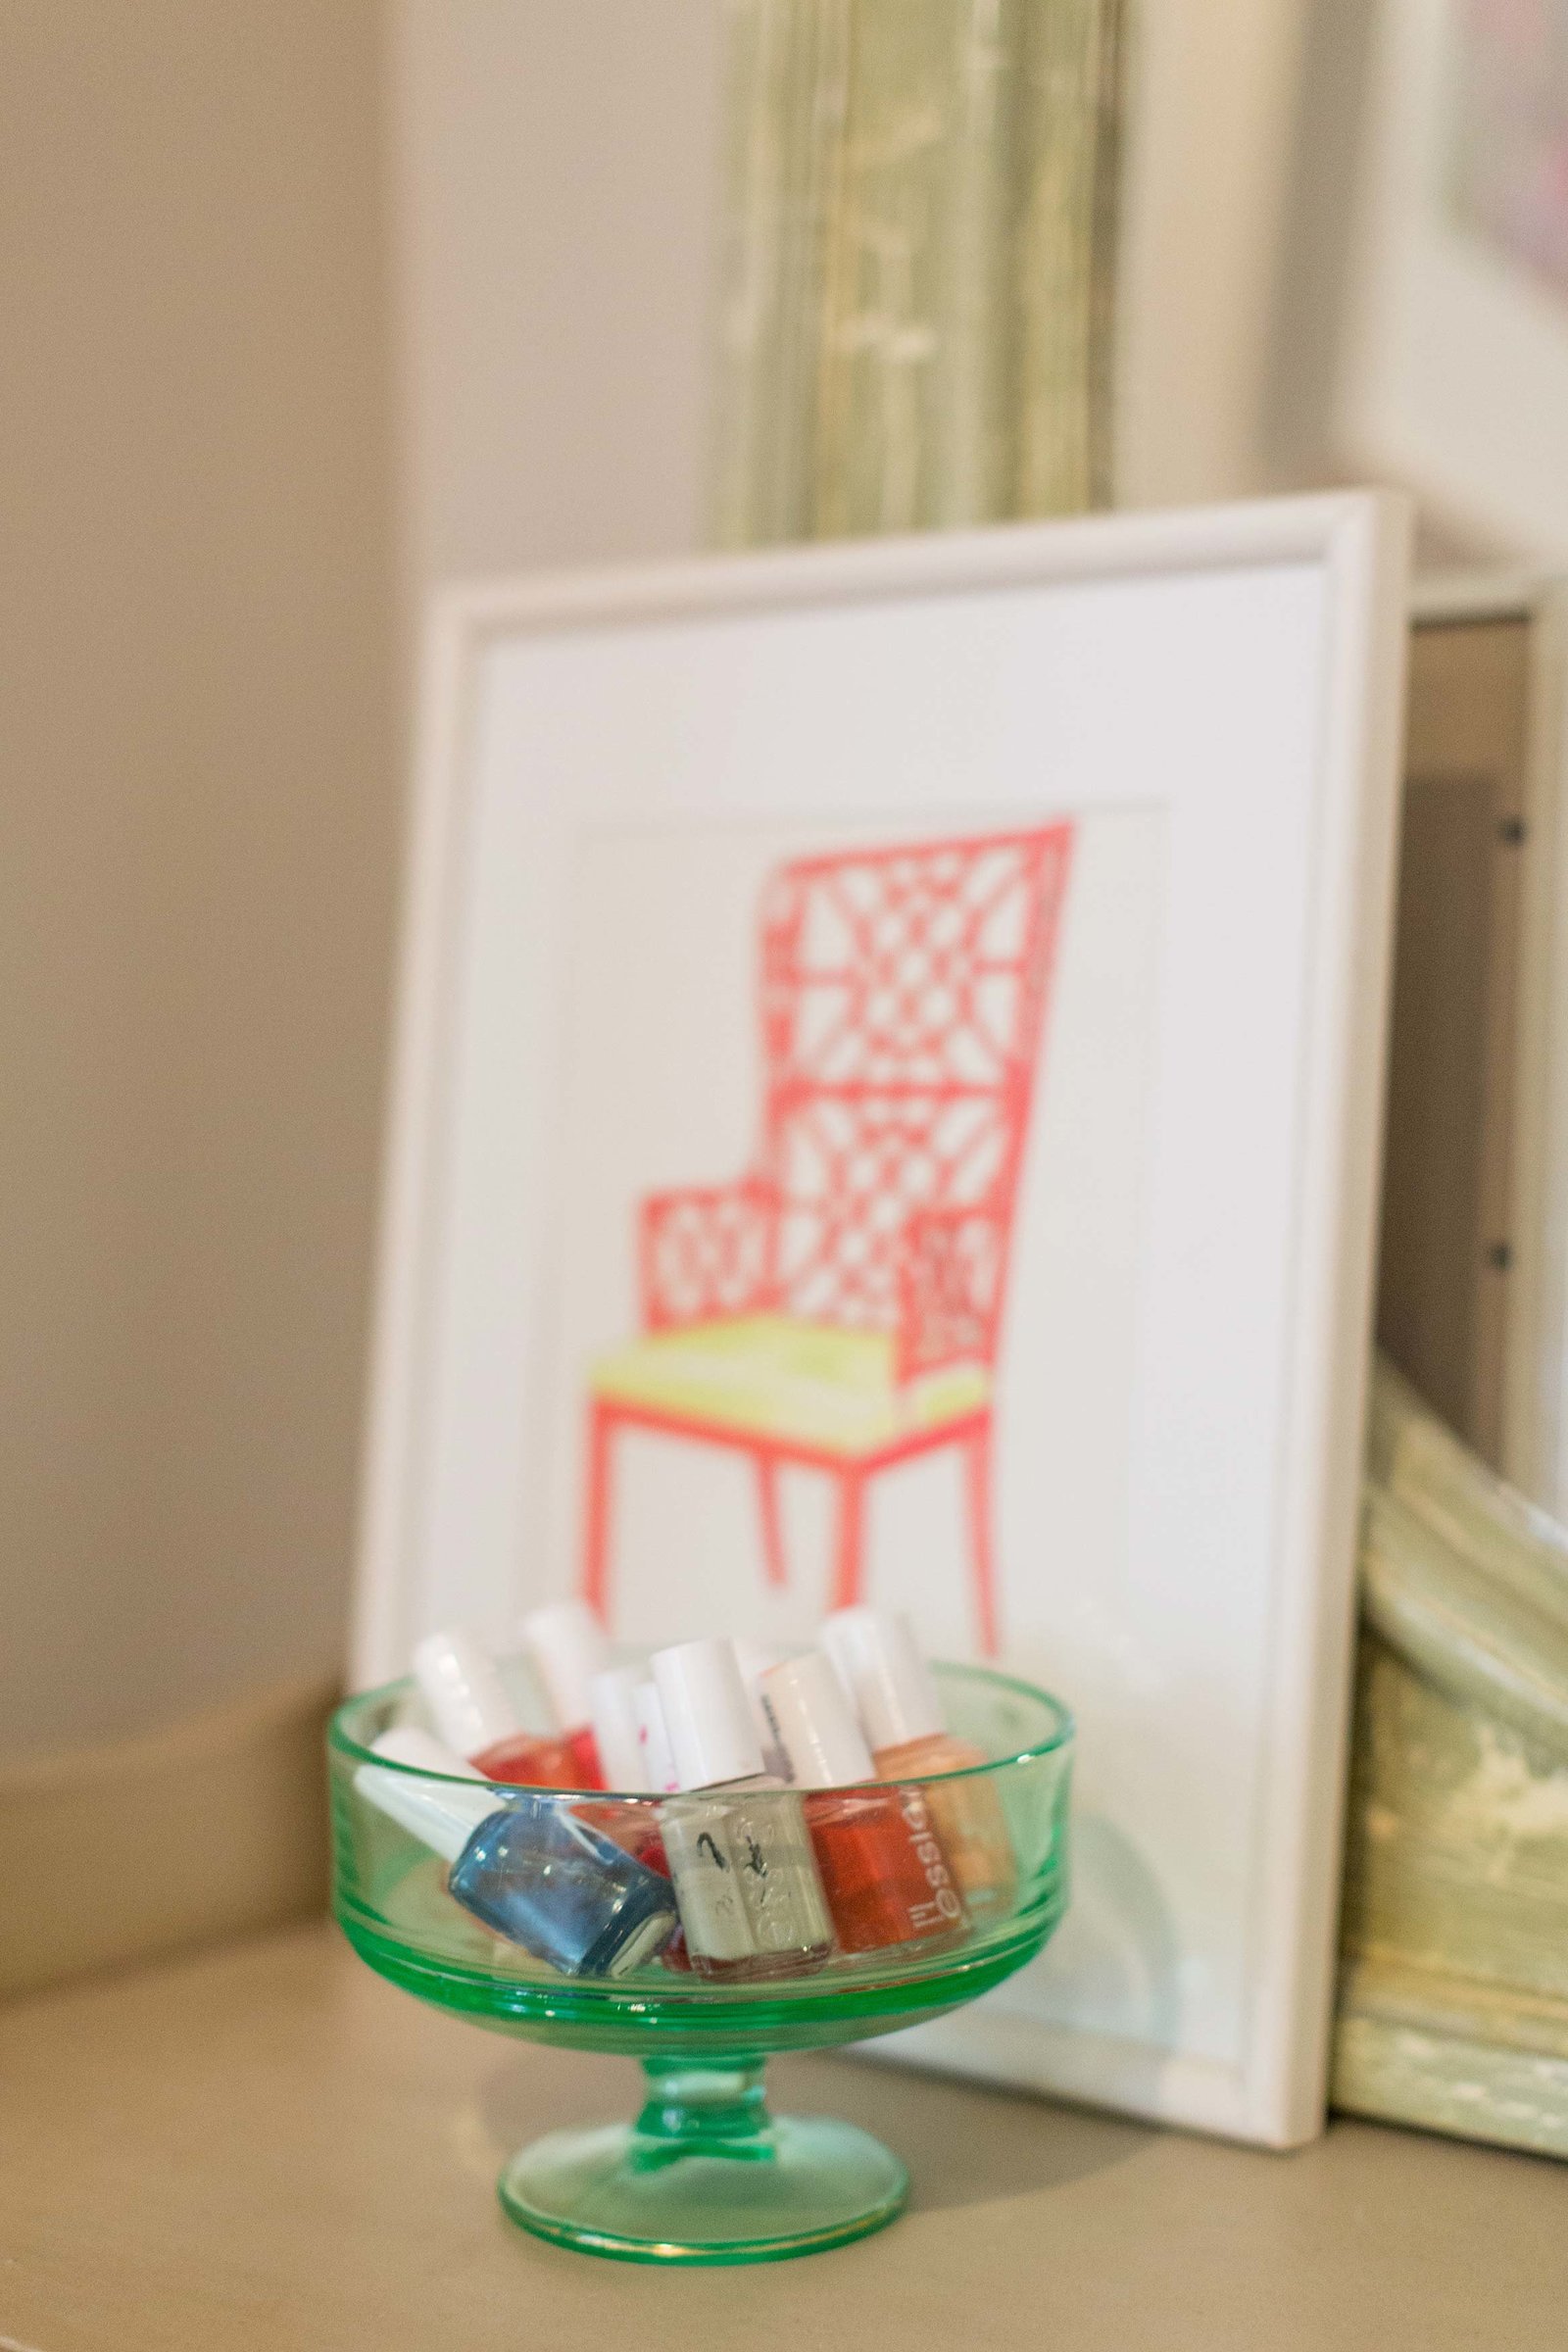 A glass dish with nail polish and a framed print of an orange chair.